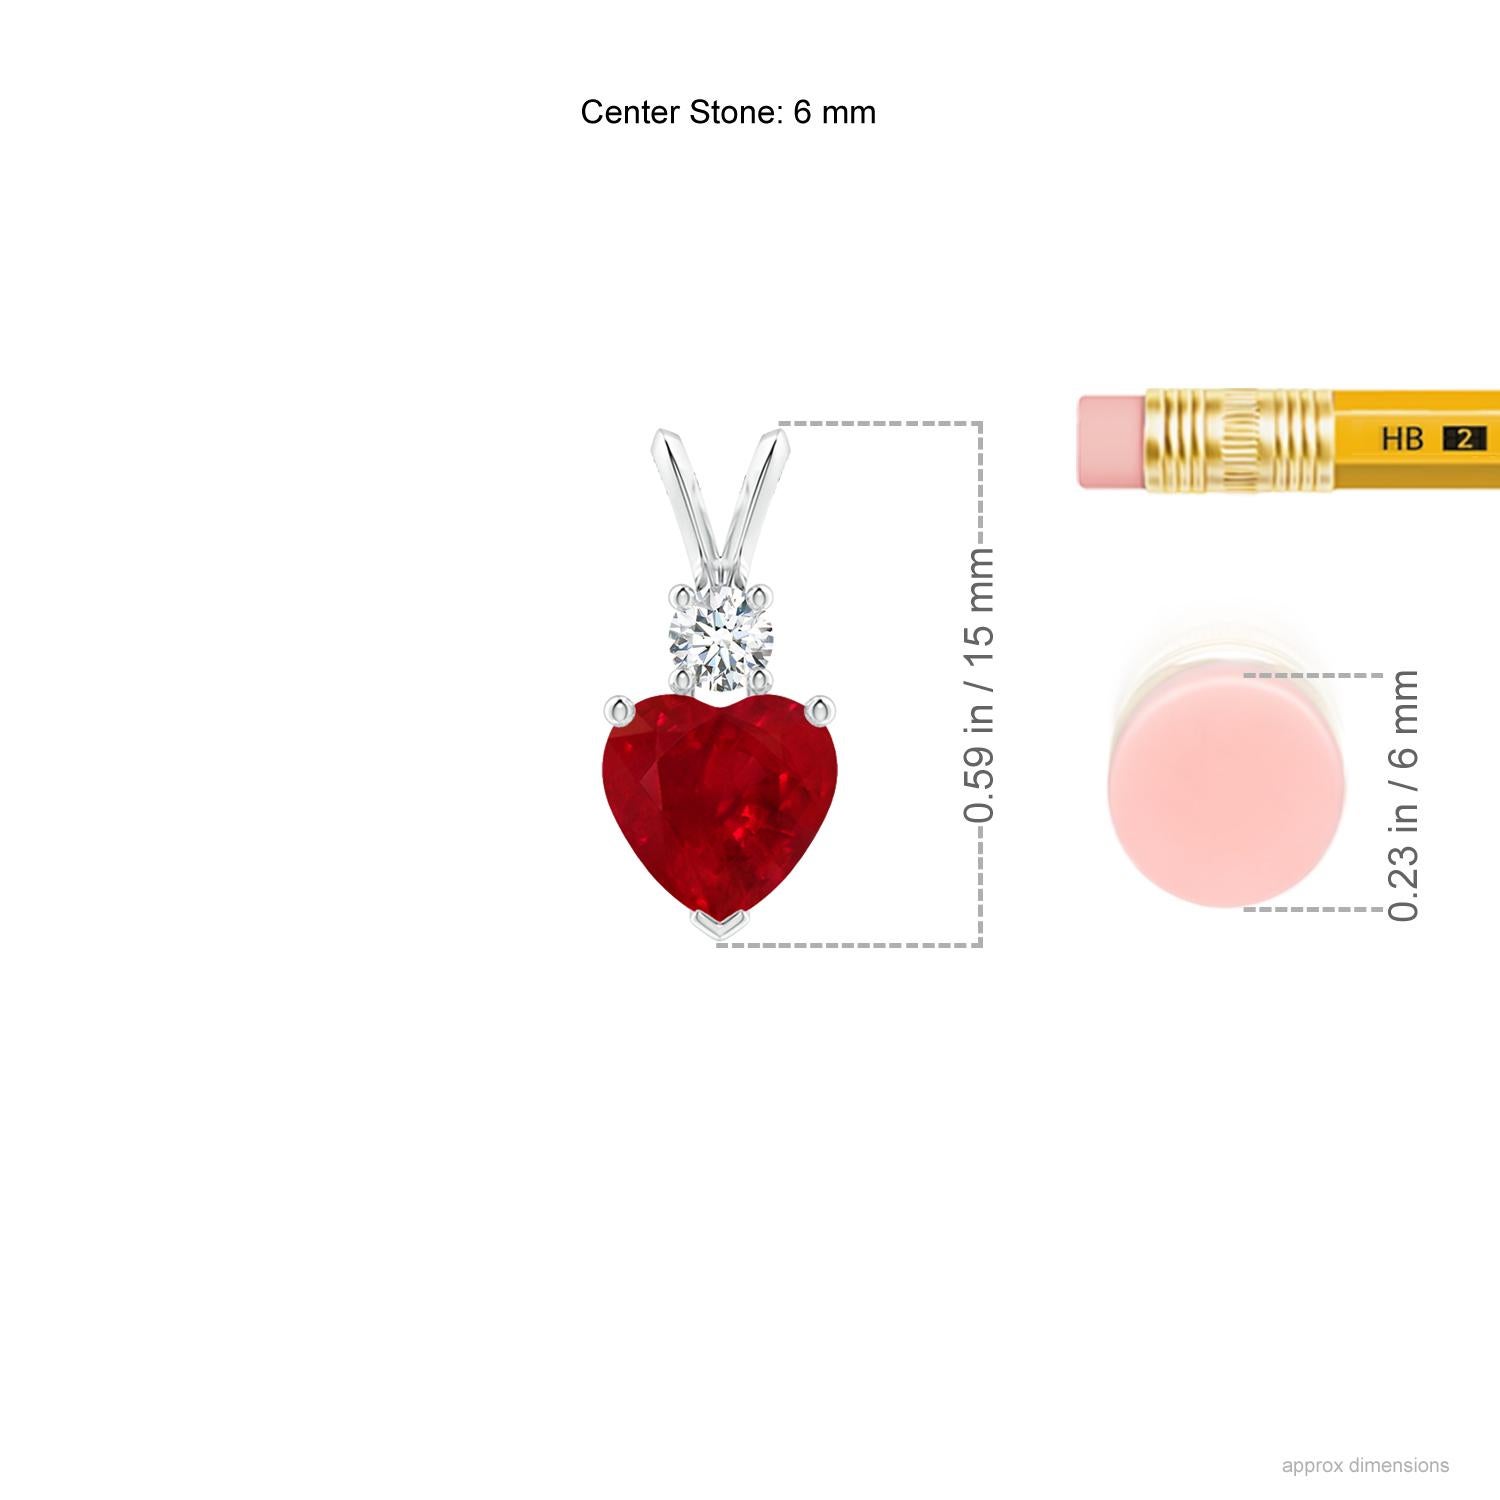 This heart-shaped ruby pendant in platinum is a beautiful symbol of love. The bold red gem is topped with a glittering round diamond and linked to a rabbit ear bale.
Ruby is the birthstone for July and the traditional gemstone gift for the 15th &